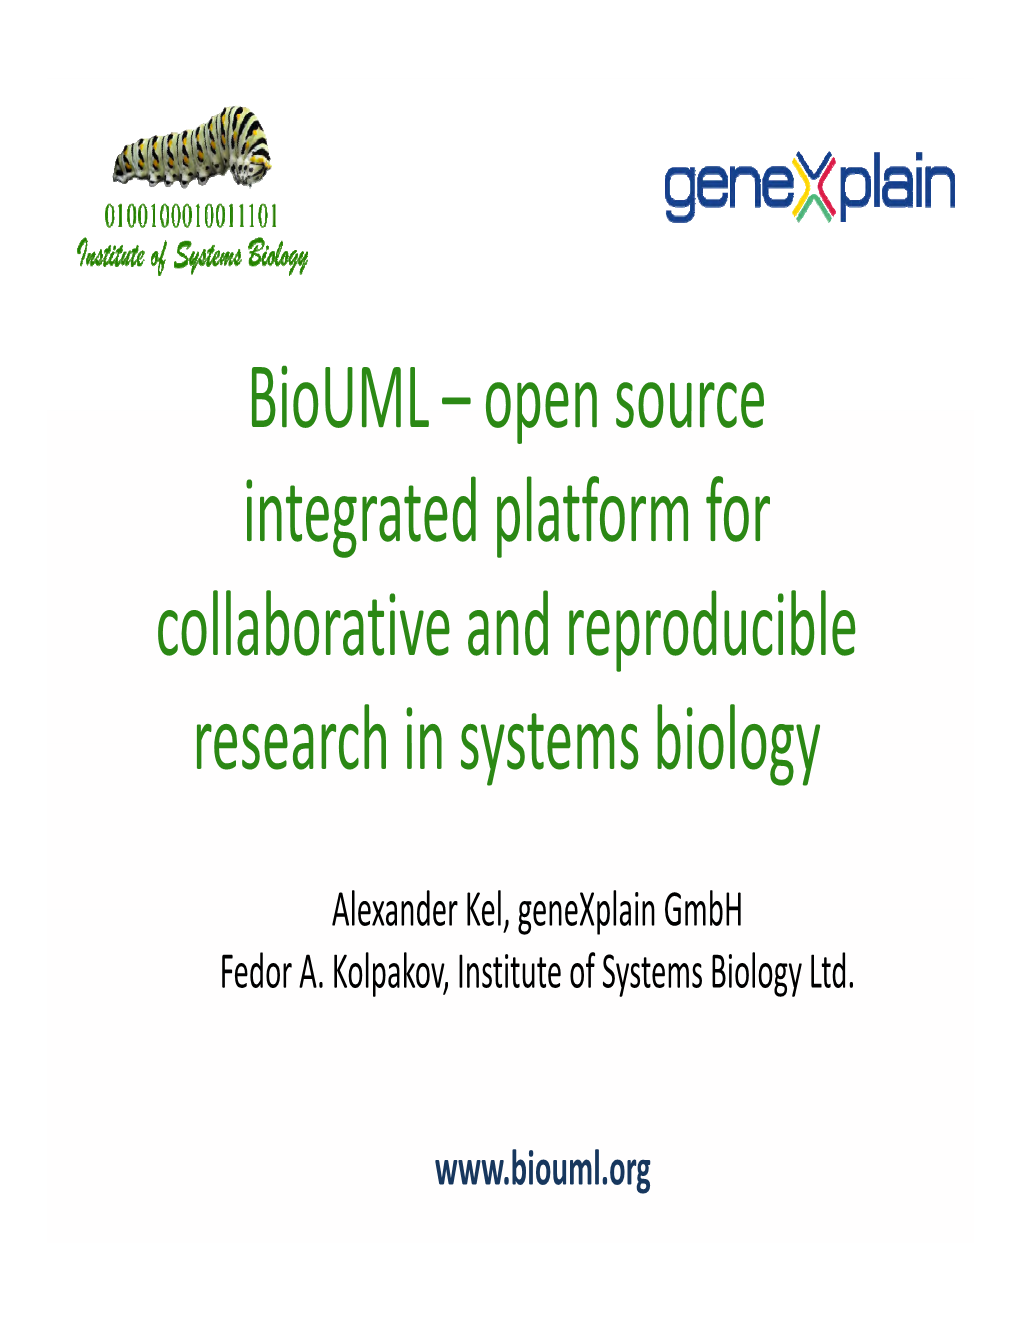 Biouml – Open Source Integrated Platform for Collaborative and Reproducible Research in Systems Biology